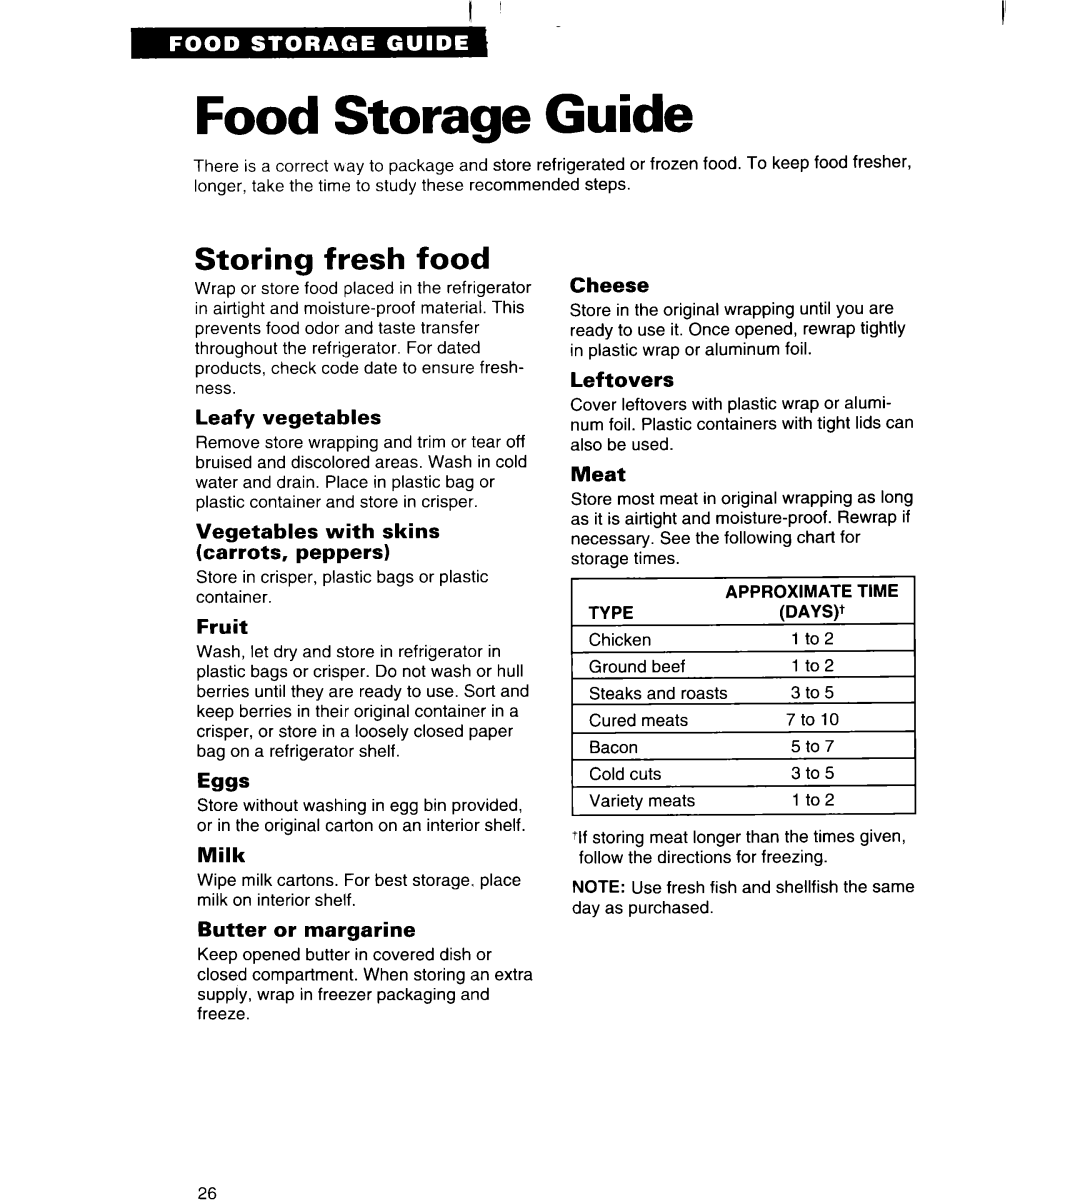 Whirlpool 3VED27DQ Food Storage Guide, Storing fresh food, Leafy vegetables, Vegetables with skins carrots, peppers, Fruit 